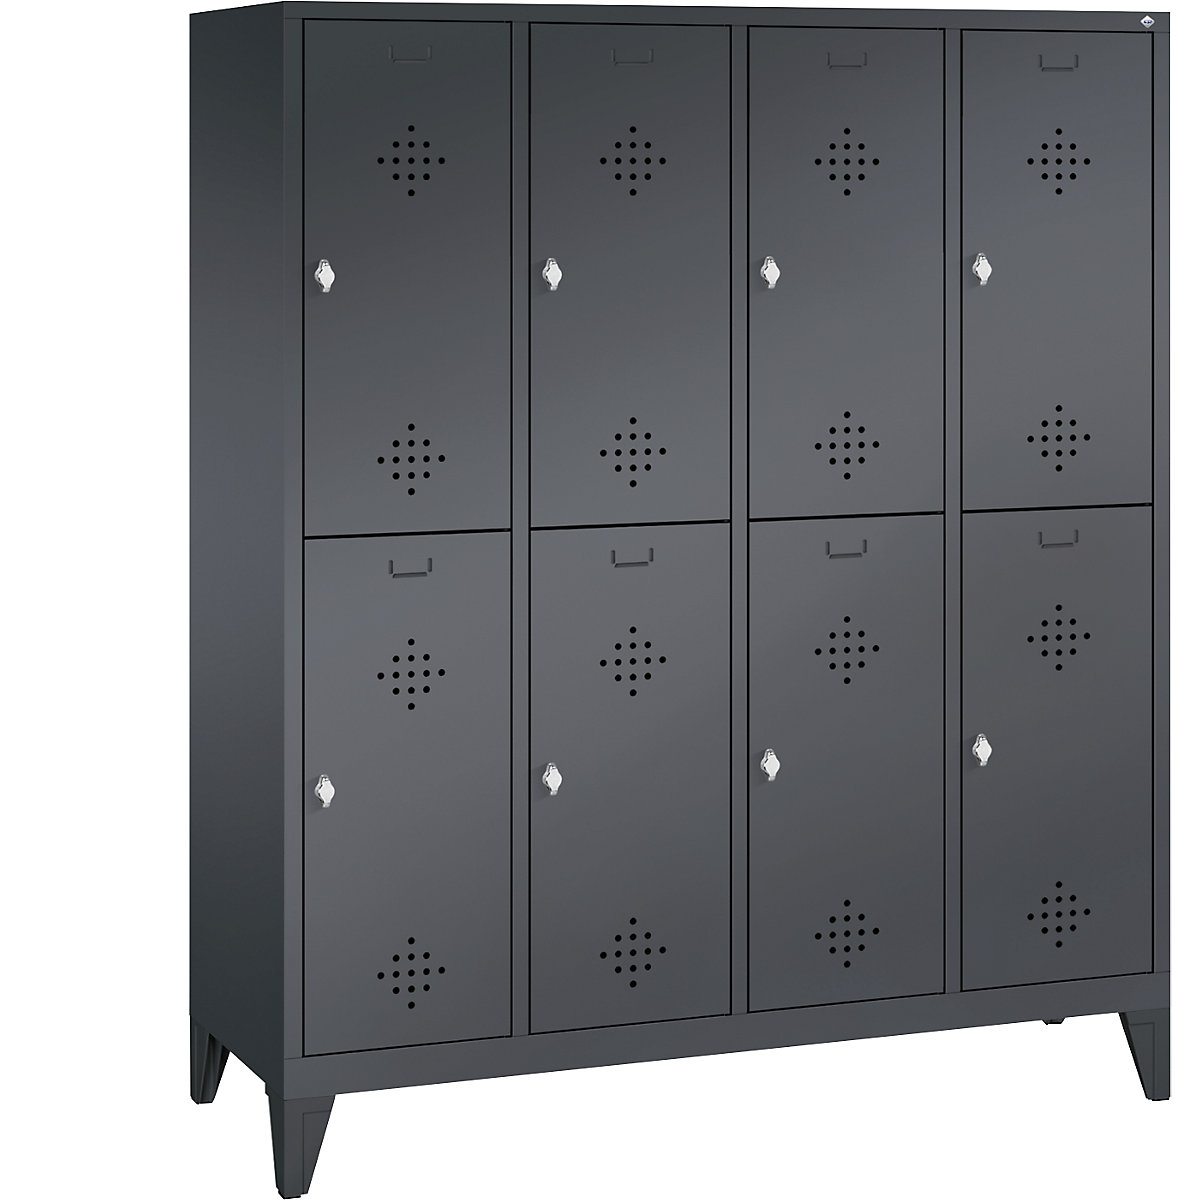 CLASSIC cloakroom locker with feet, double tier – C+P, 4 compartments, 2 shelf compartments each, compartment width 400 mm, black grey-11